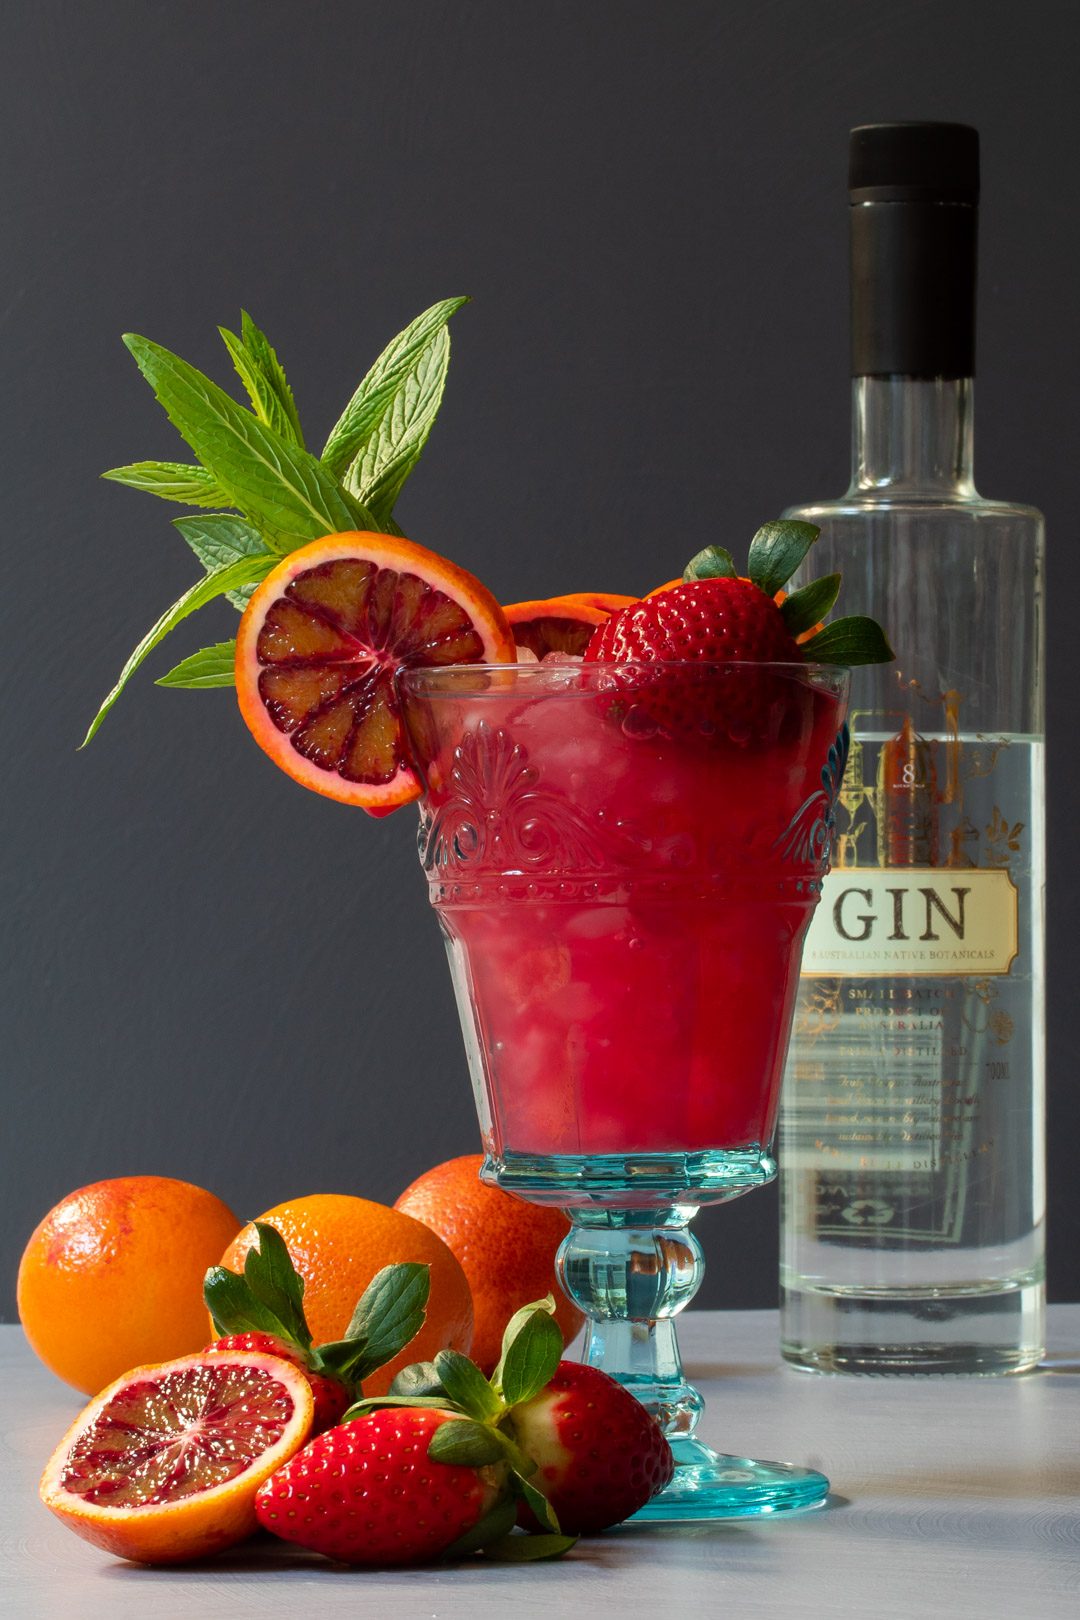 blood orange pomegranate gin daisy cocktail with fruit in foreground and gin bottle in background close crop